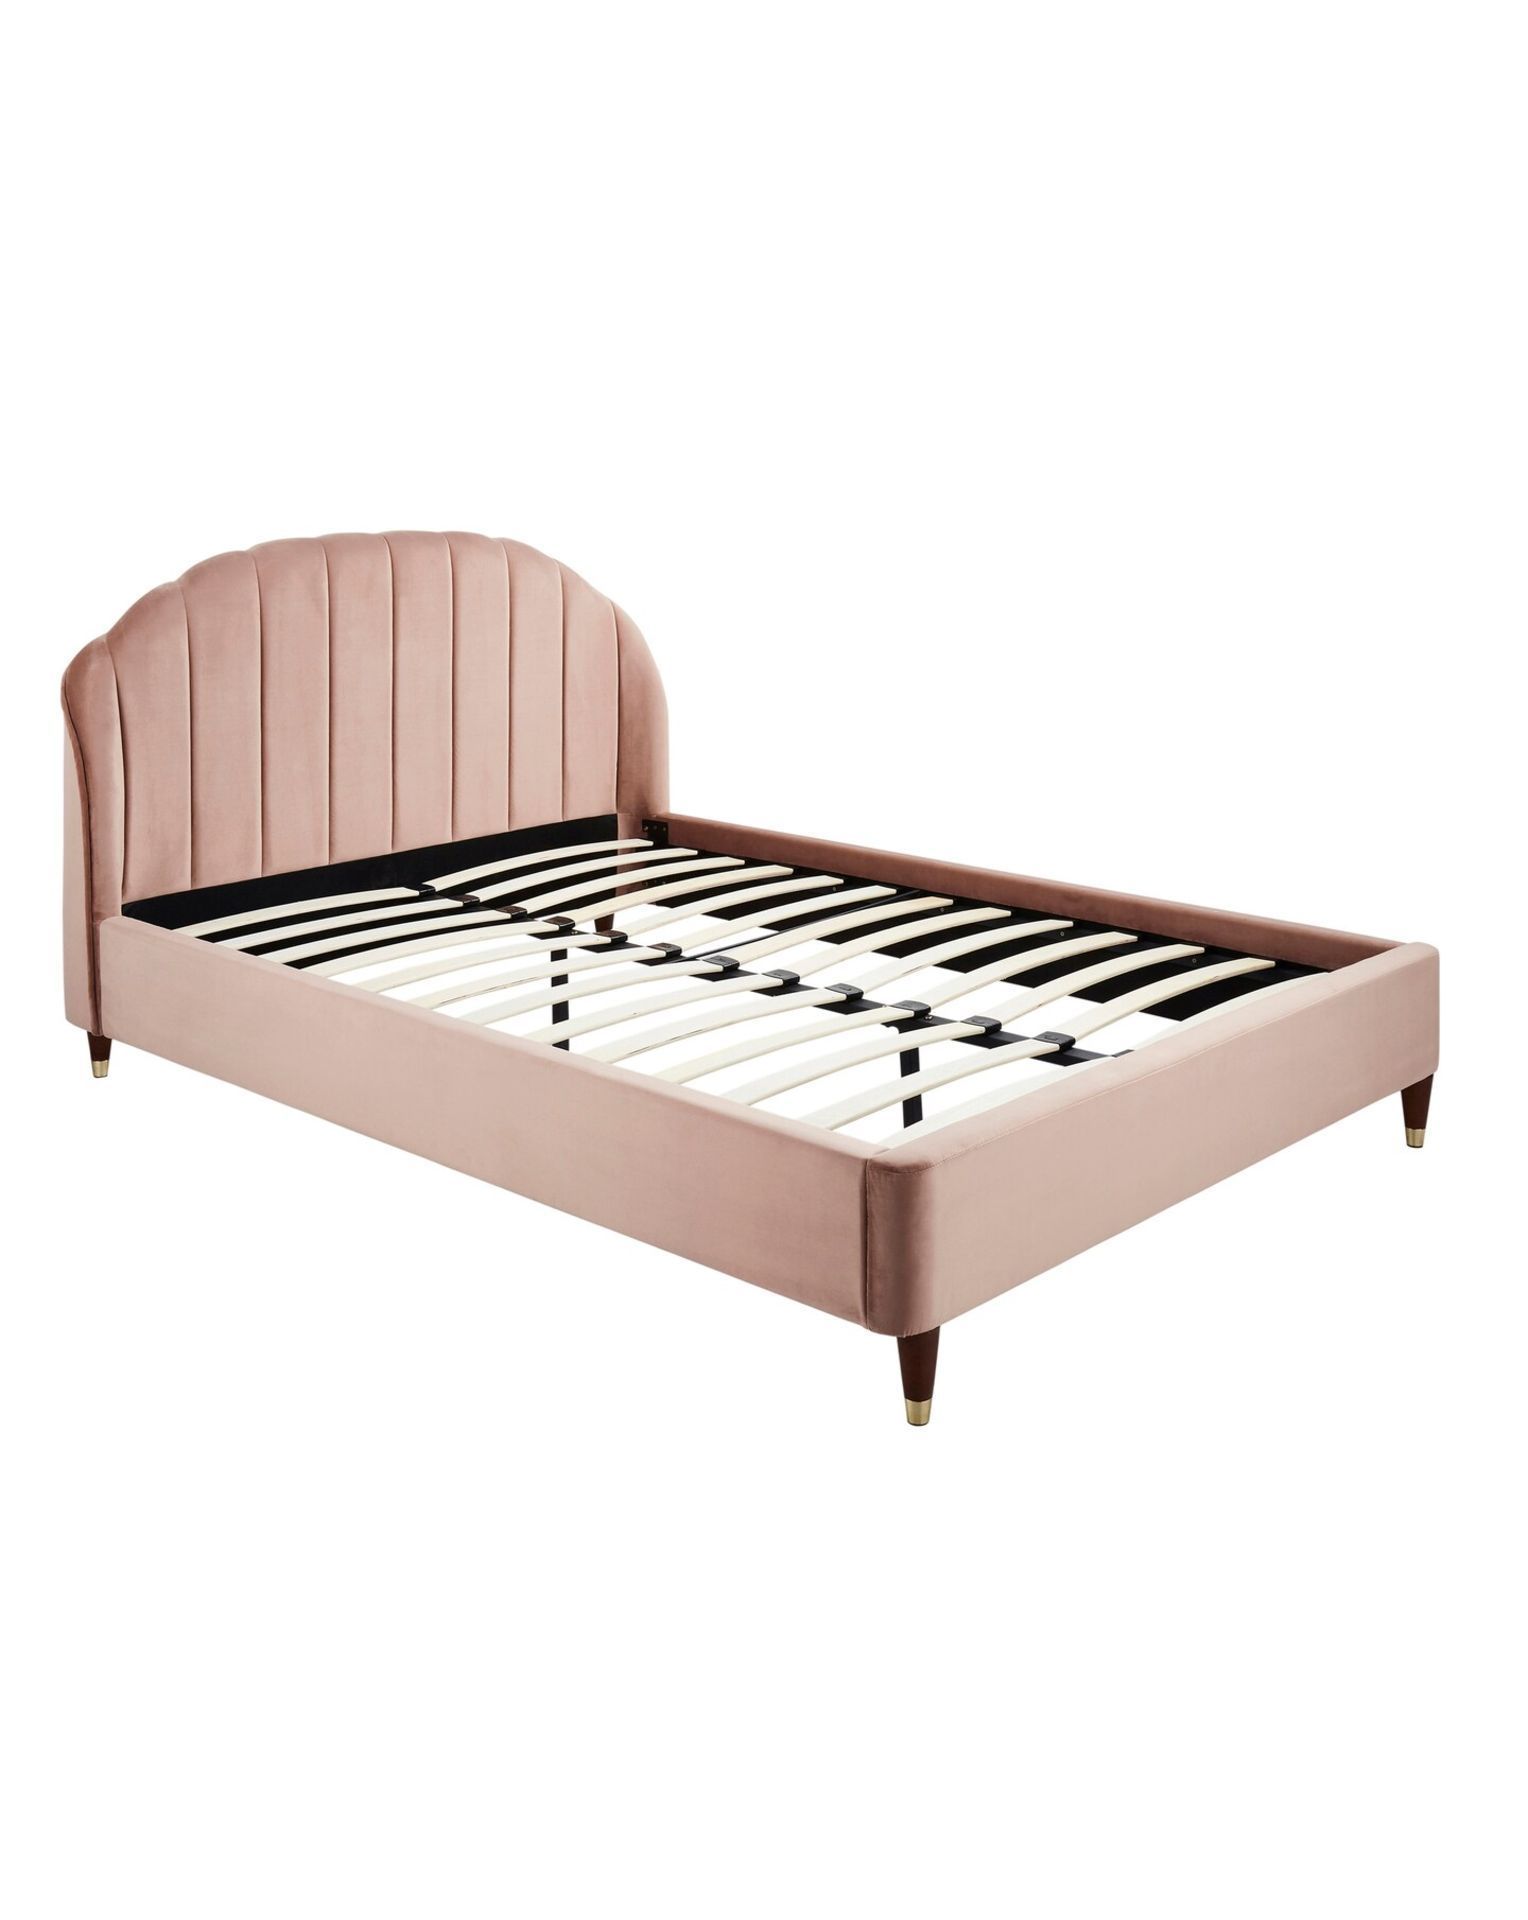 BRAND NEW CLARA Fabric KING Bed Frame. BLUSH. RRP £599 EACH. The Clara fabric bed frame features a - Image 2 of 2